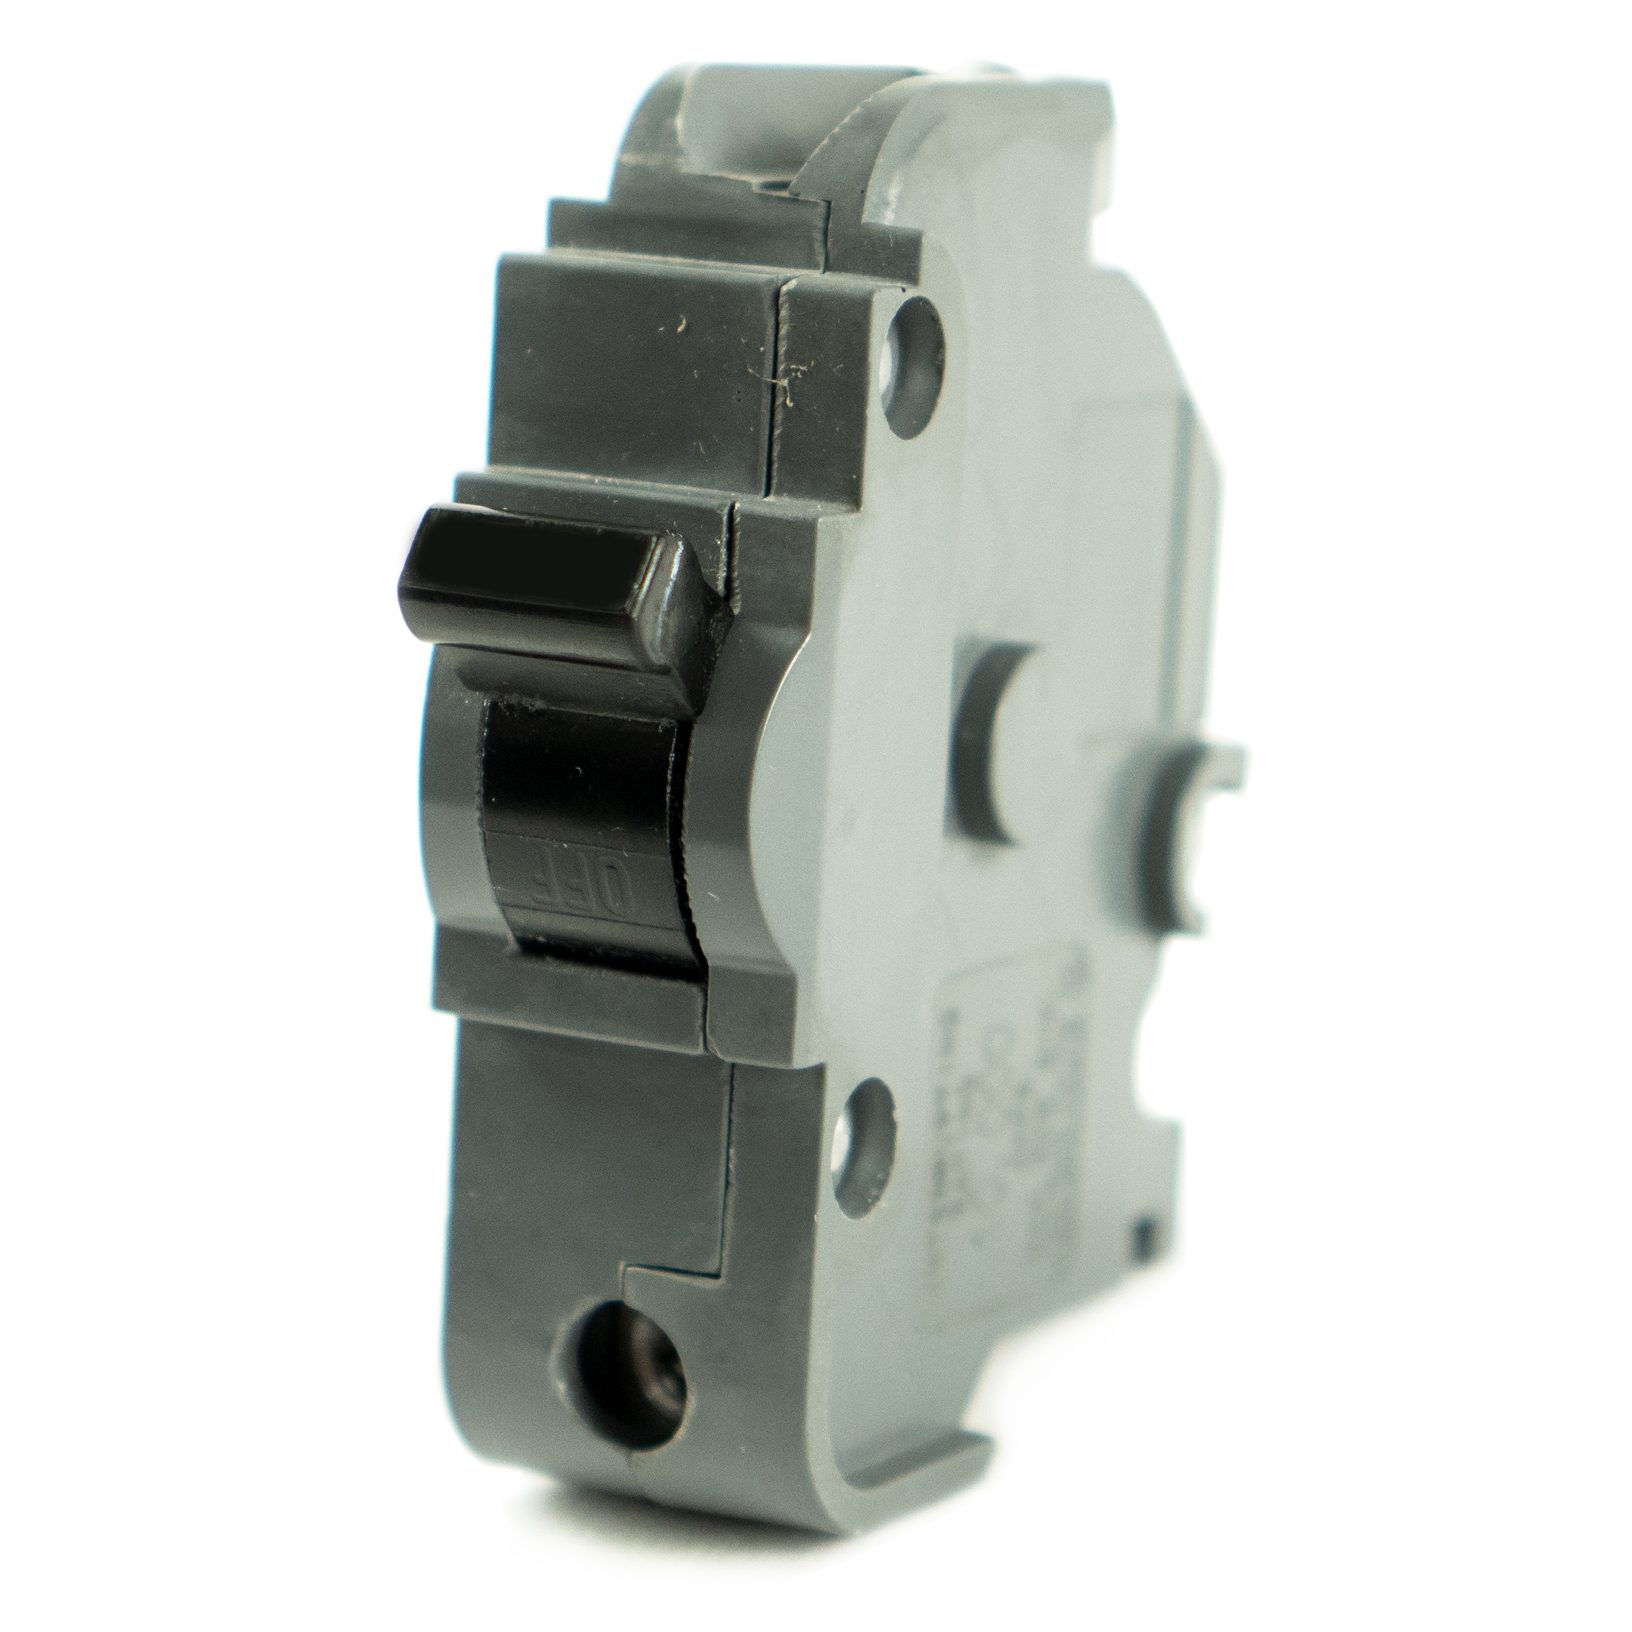 Connecticut Electric manufactures new high quality replacement circuit breakers for NBLP® load centers that accept NB style circuit breakers.  Circuit breakers should only be replaced with new tested and Safety Agency Listed circuit breakers, never used or refurbished ones. ETL Listed. 10,000 AIC. 1-Pole, 15 amp.